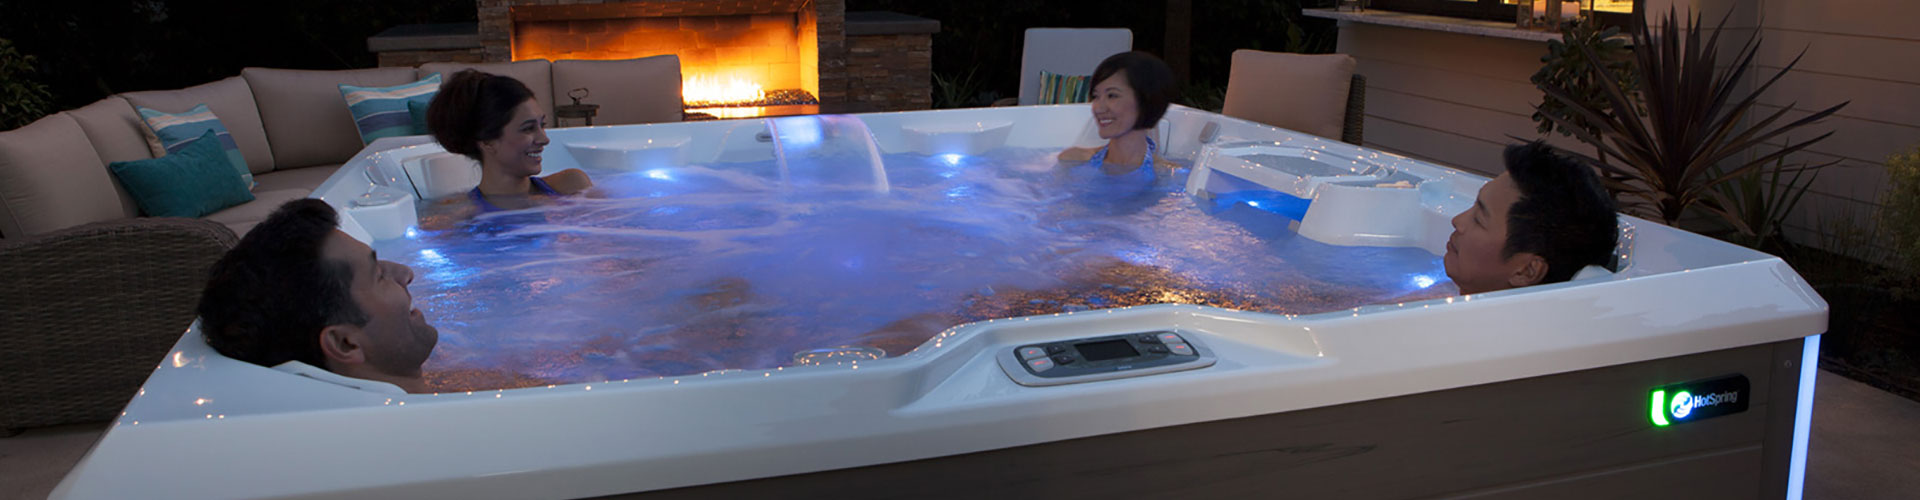 Discover the Best You, With a Spa at Home, Hot Tub Sale Brookfield